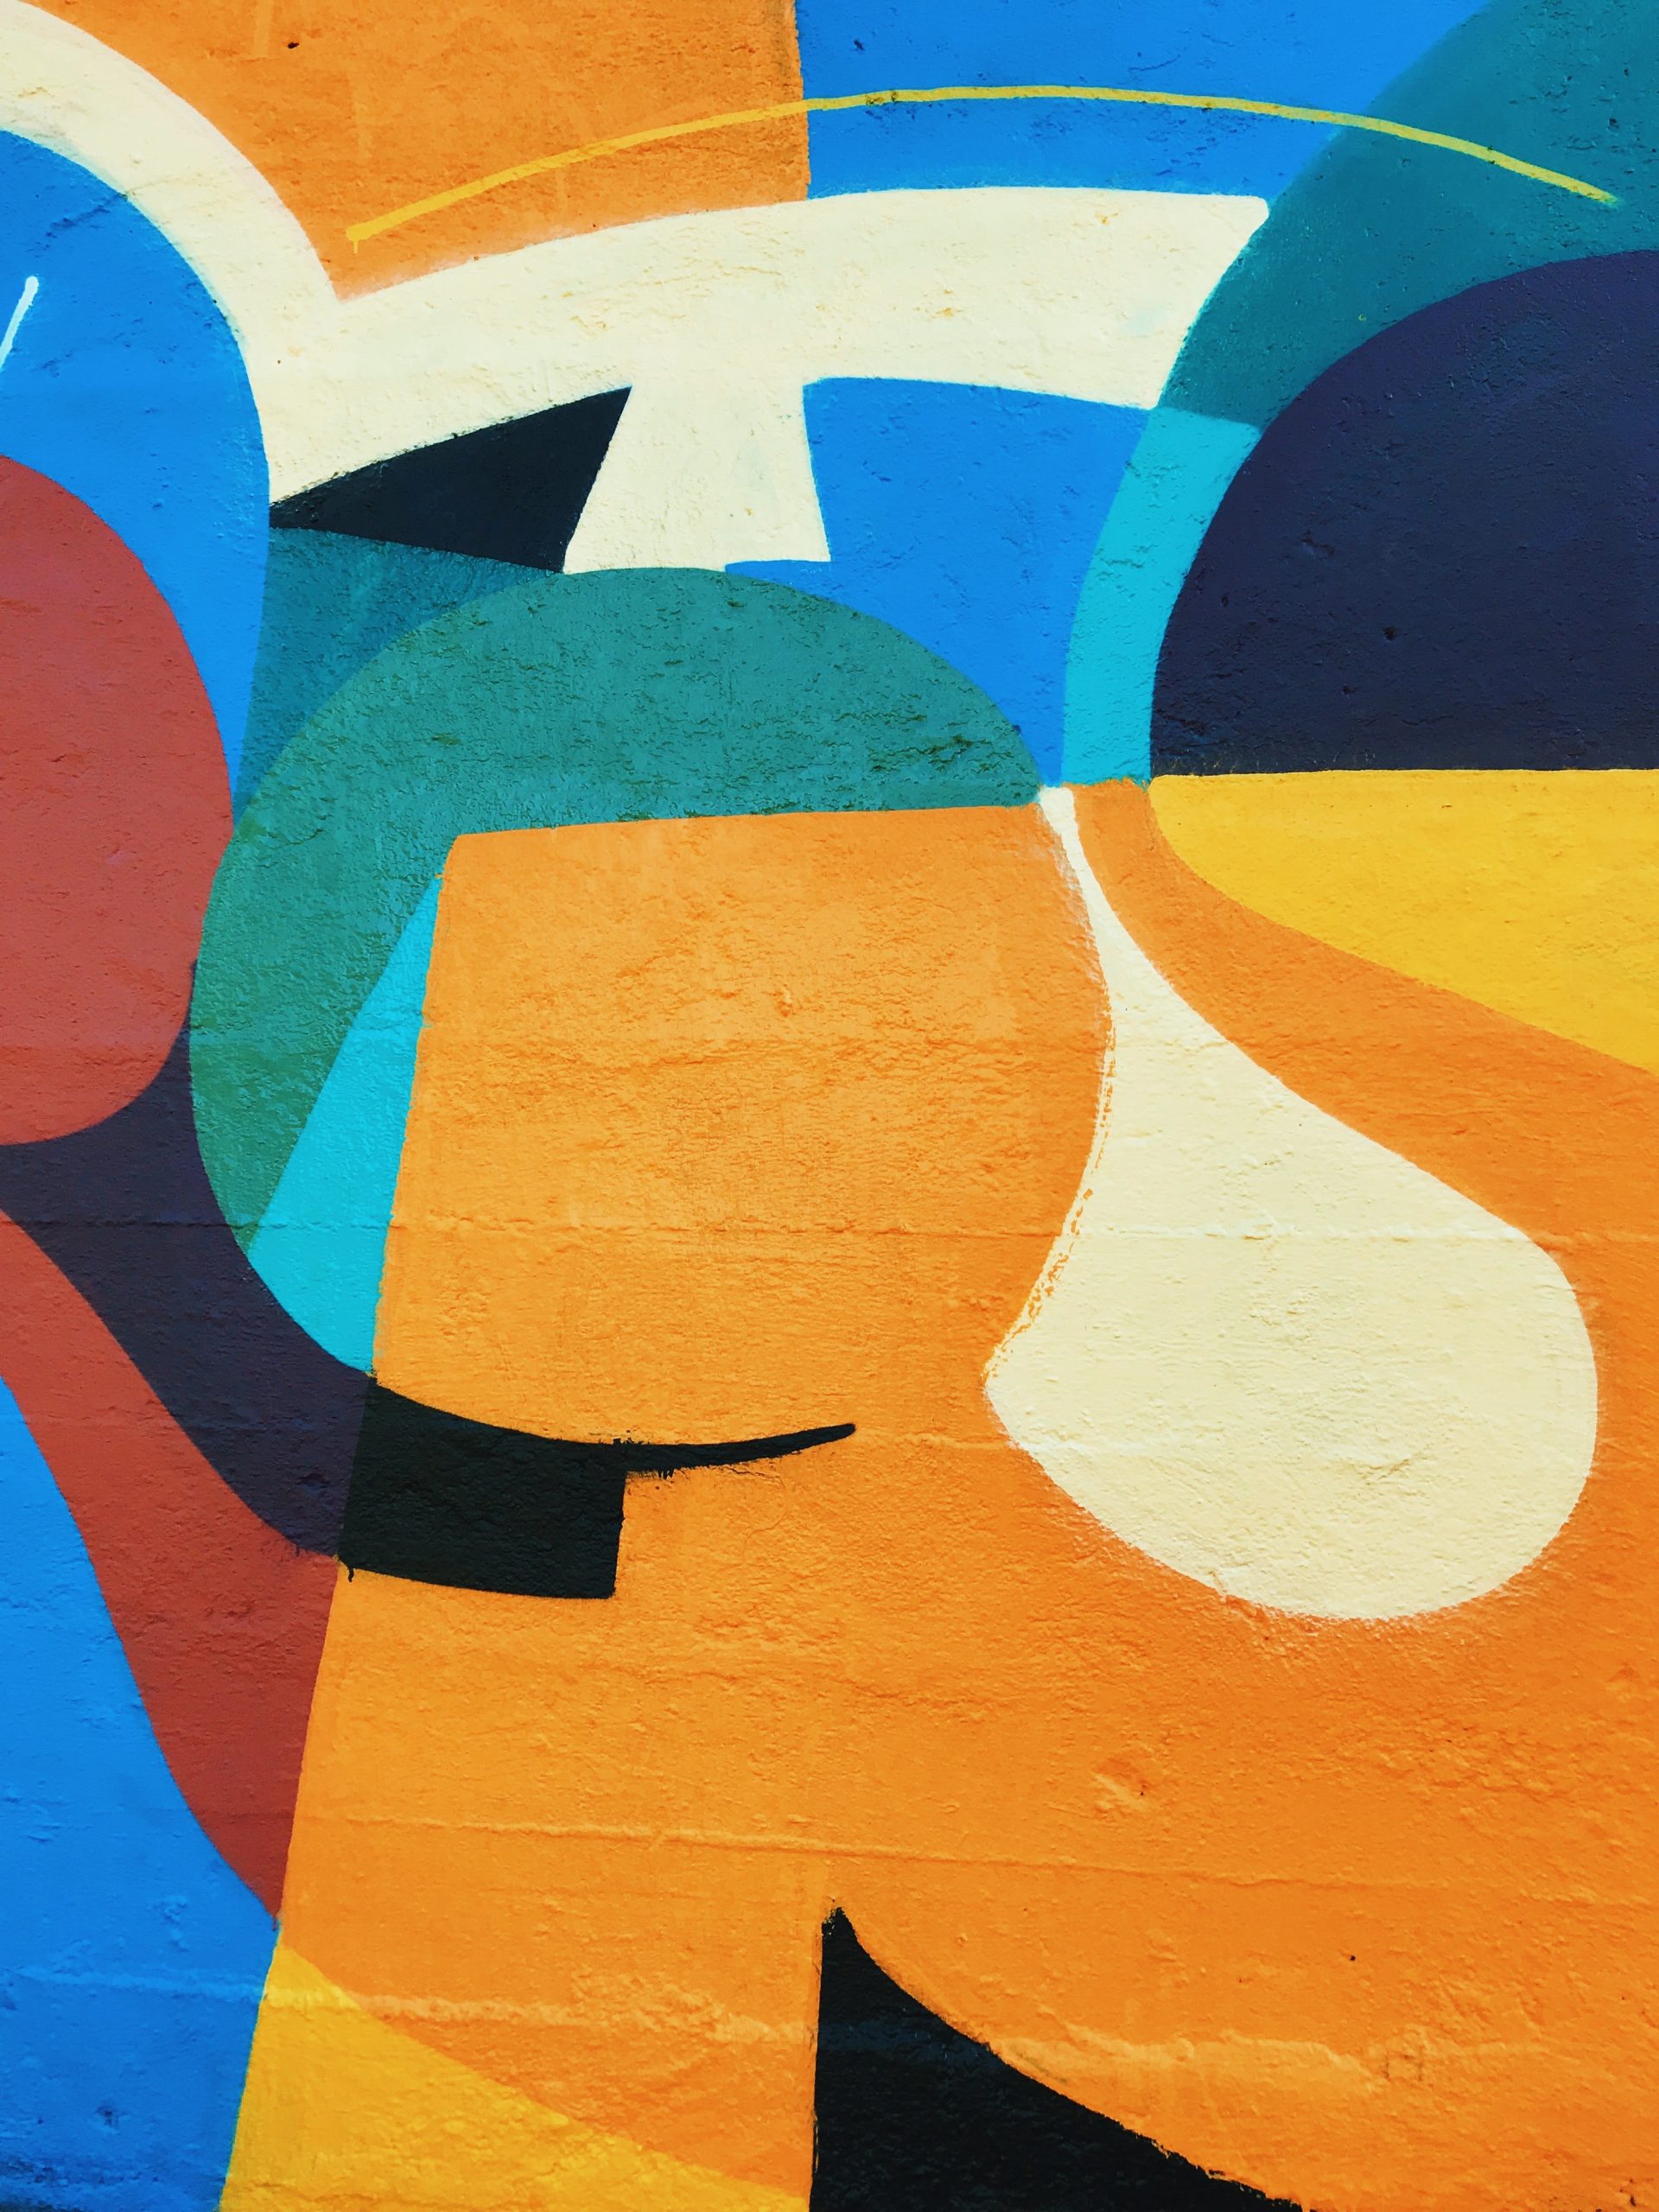 Abstract street art mural with orange and blue colors in Barcelona